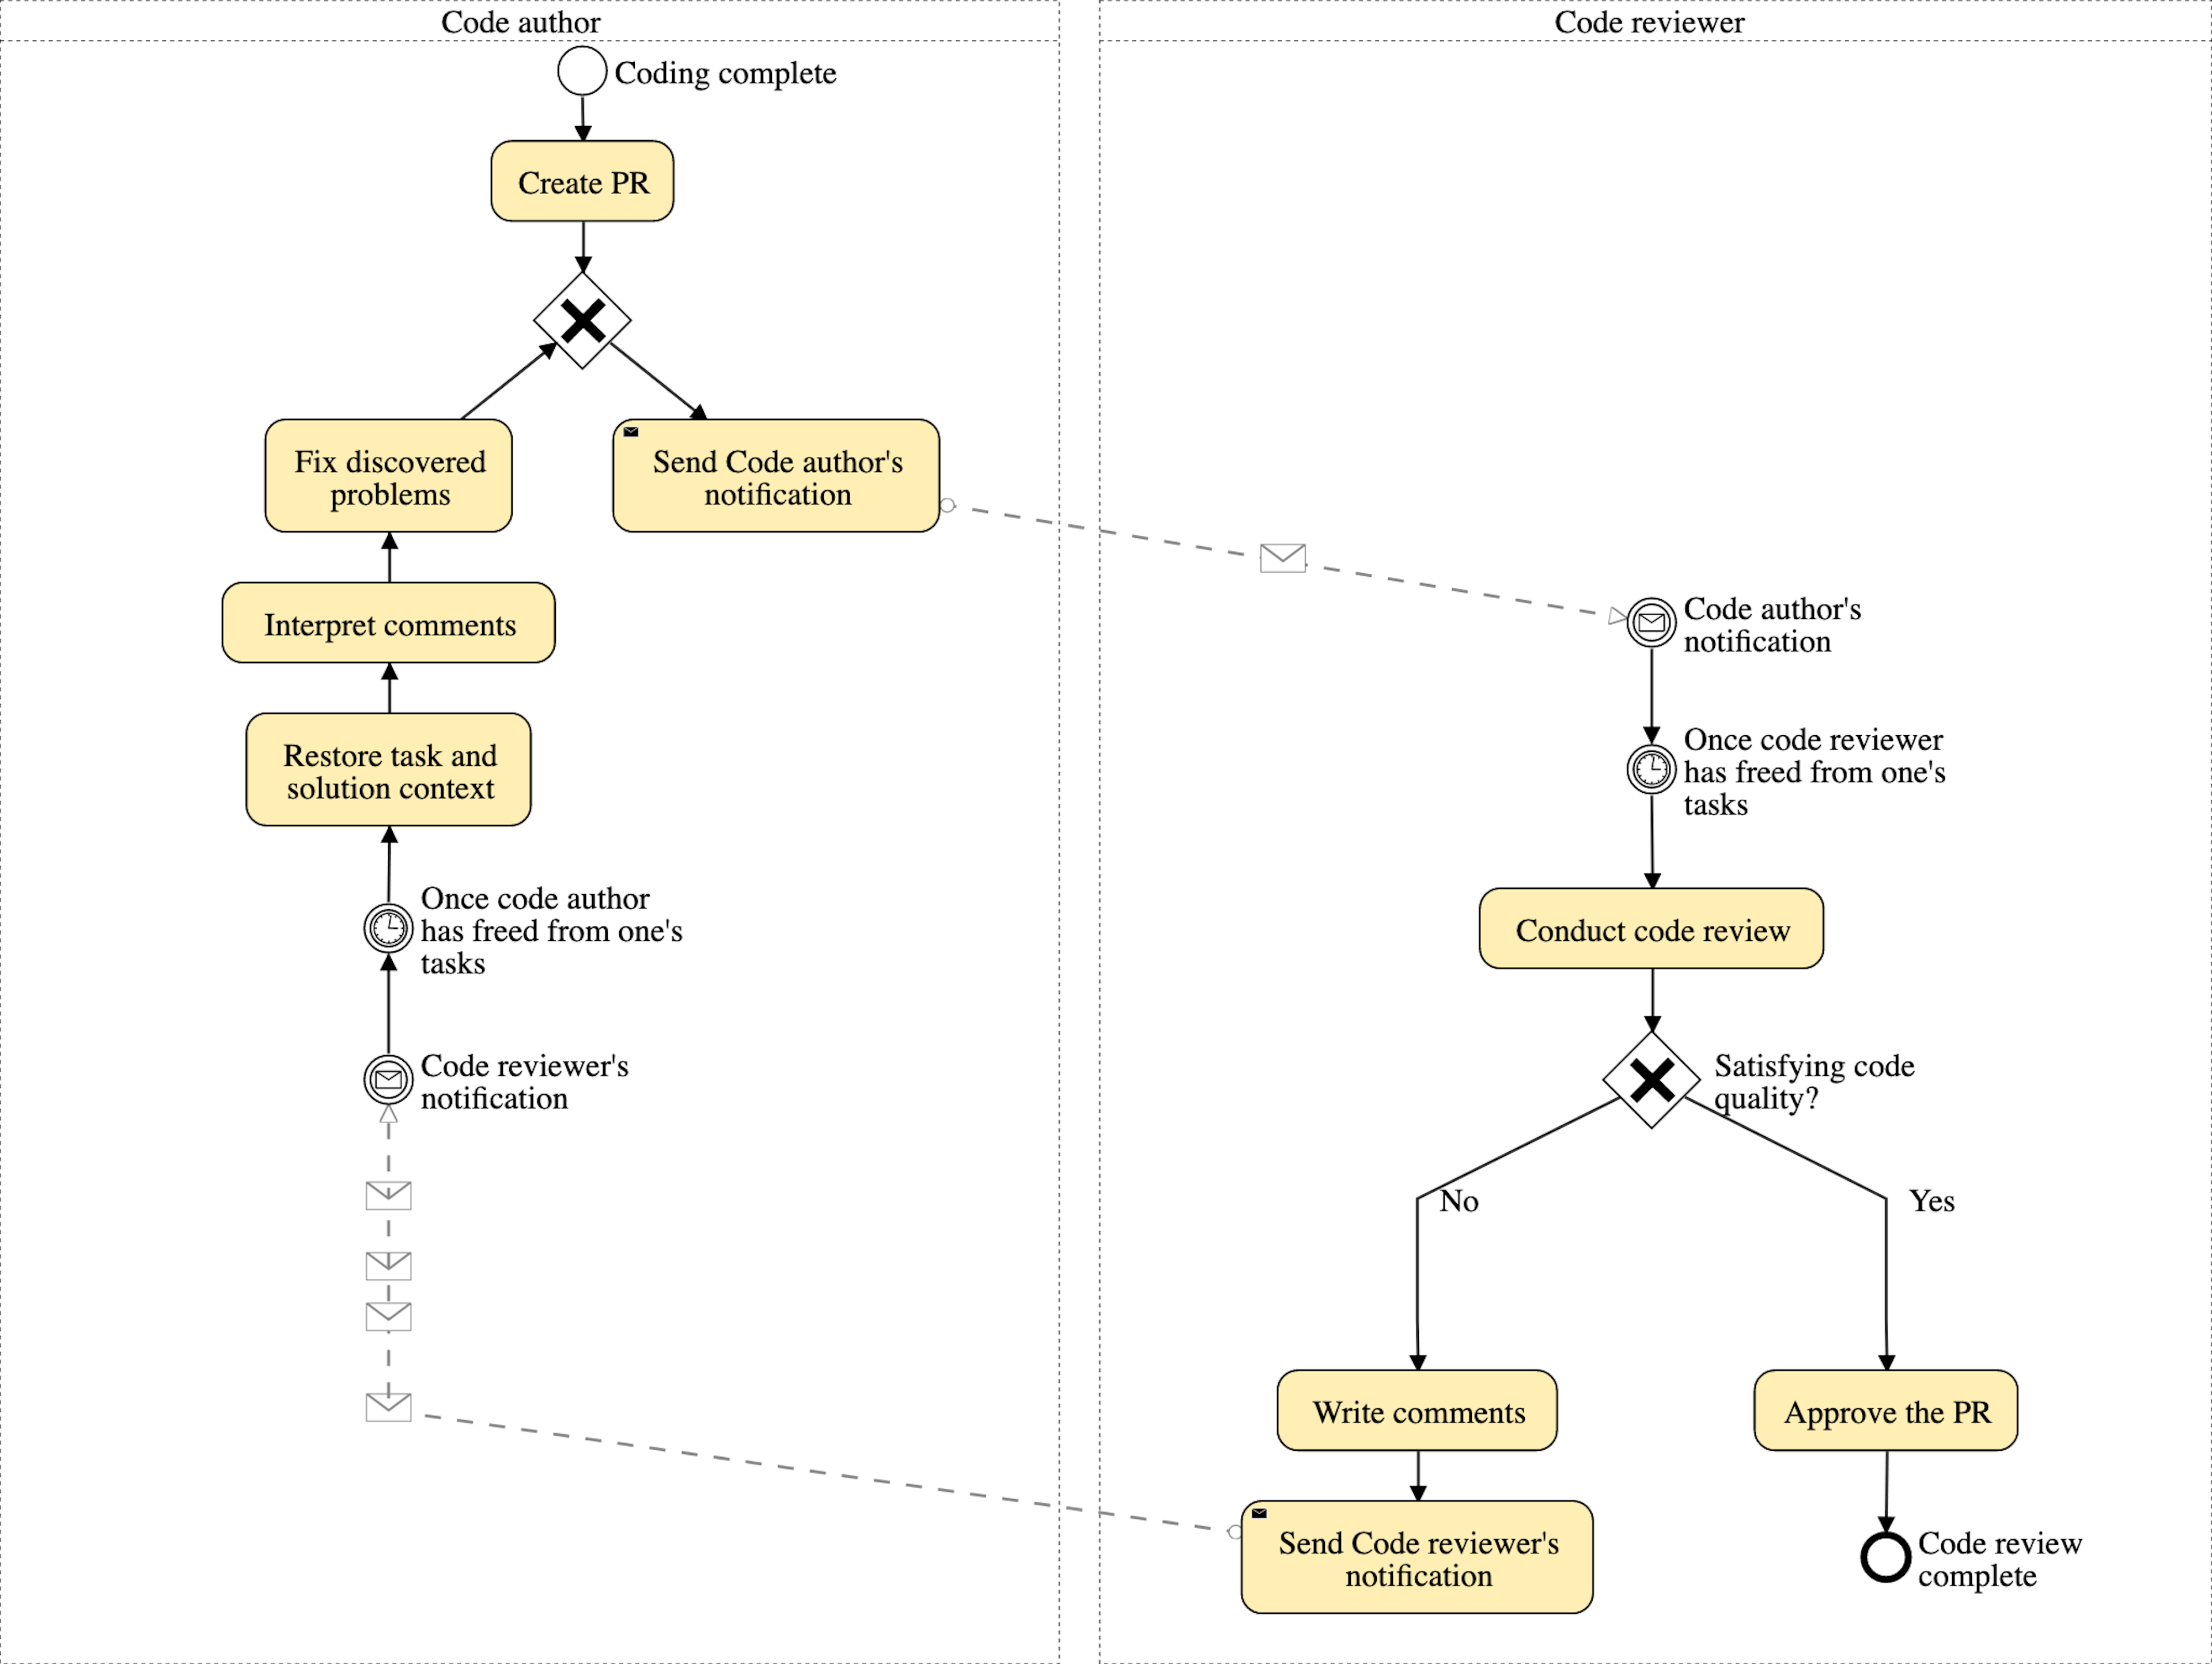 The classic code review process diagram